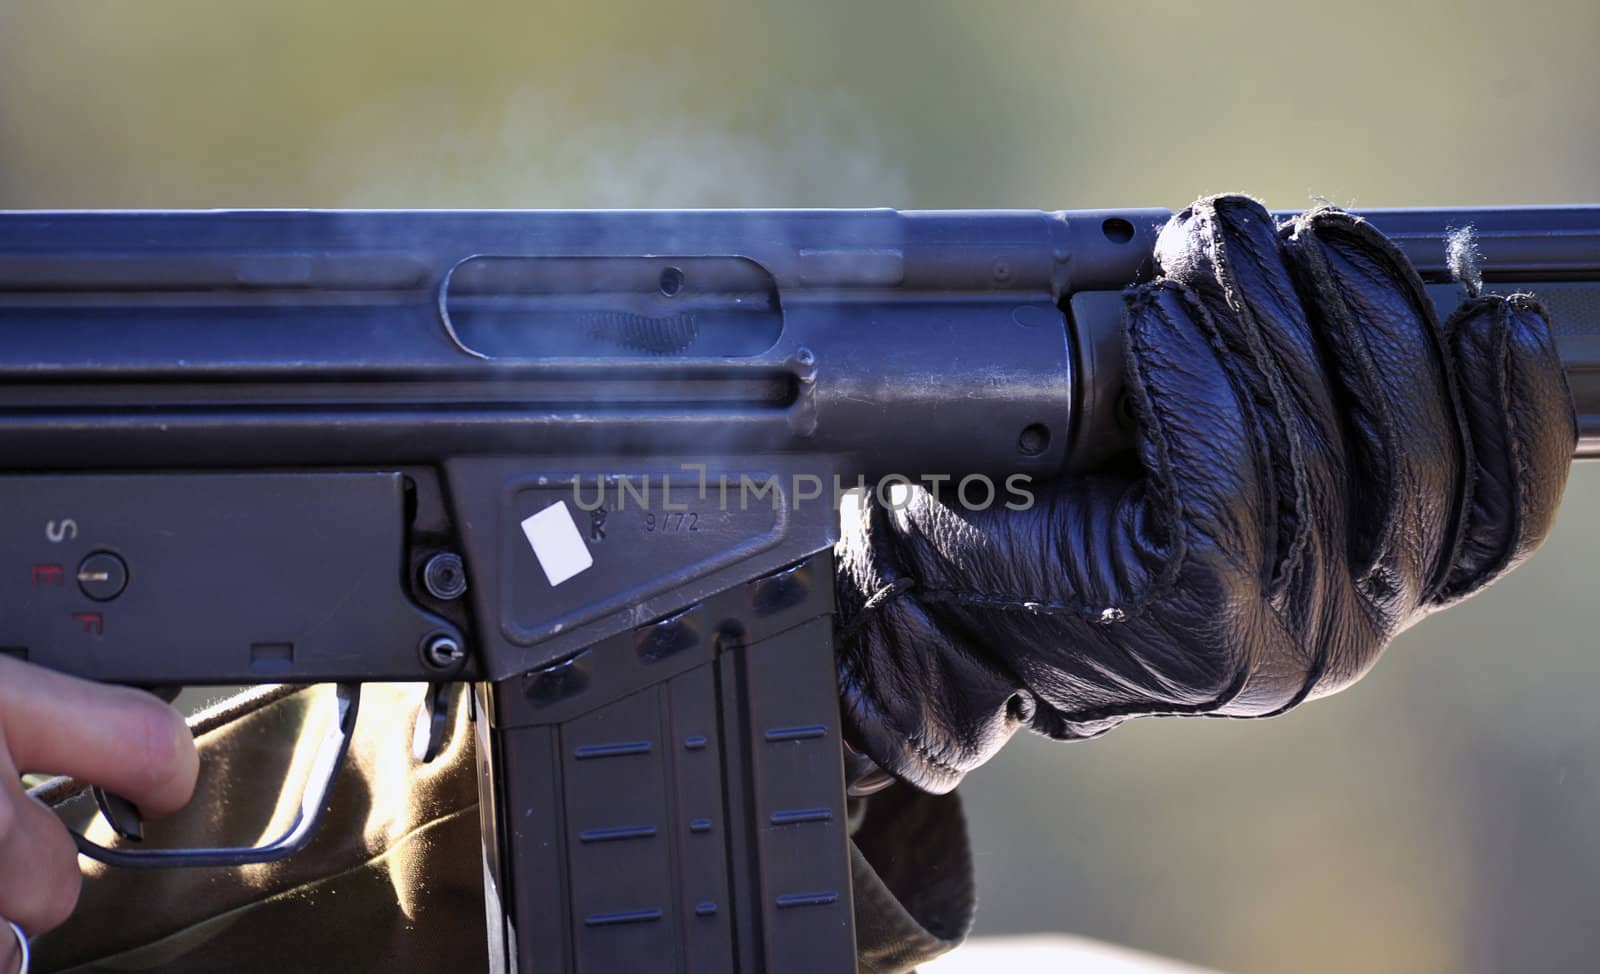 AG3 automatic rifle during shooting.